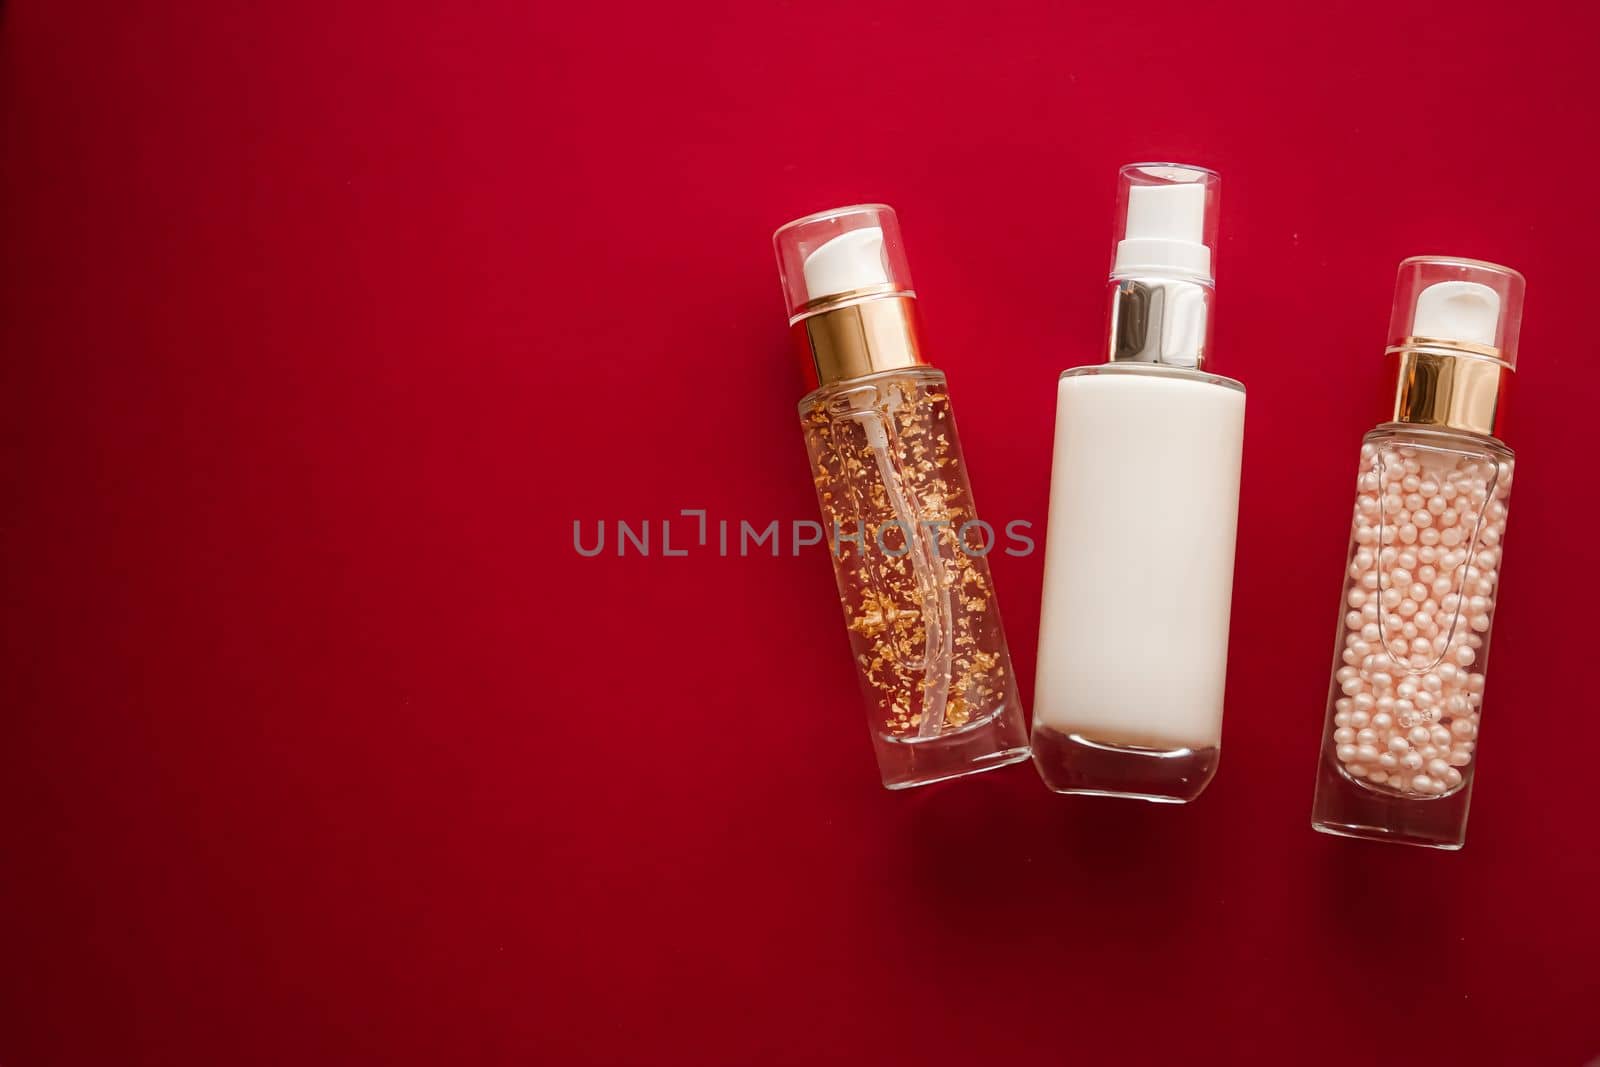 Skincare cosmetics and anti-aging beauty products, luxury skin care bottles, oil, serum and face cream on red background.